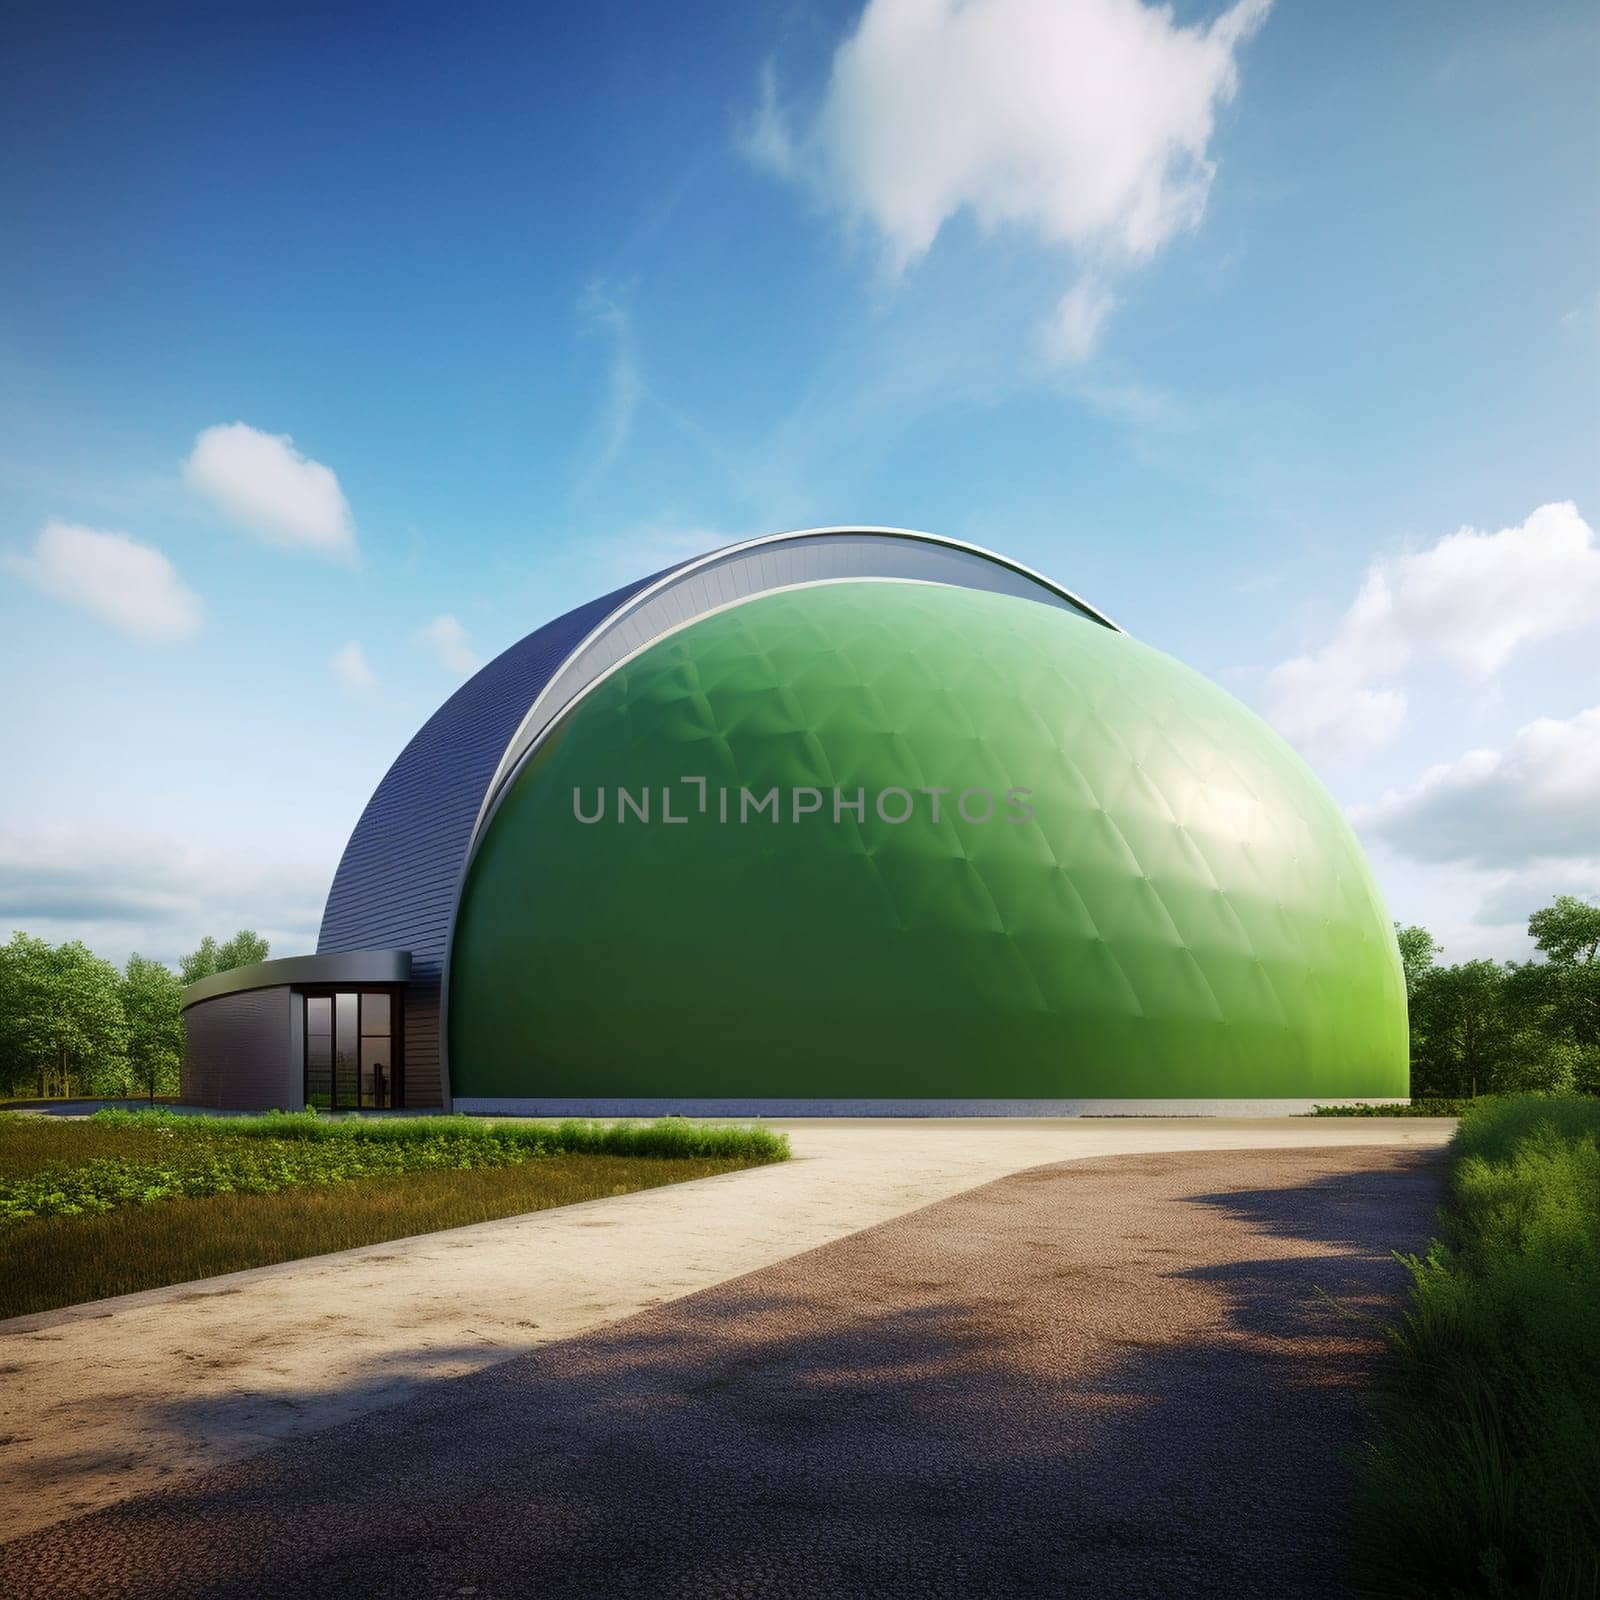 Explore the innovative design of a small-scale waste-to-energy facility that uses anaerobic digestion to produce biogas with this striking image. The unique design of the facility highlights the beauty of sustainable construction and promotes waste reduction and renewable energy production. The camera angle and lighting emphasize the colors and textures of the materials used in the construction, further highlighting the beauty of the structure. The facility can process organic waste such as food scraps and agricultural waste to produce clean, renewable biogas, demonstrating the potential for waste-to-energy technology to reduce waste and promote sustainability.